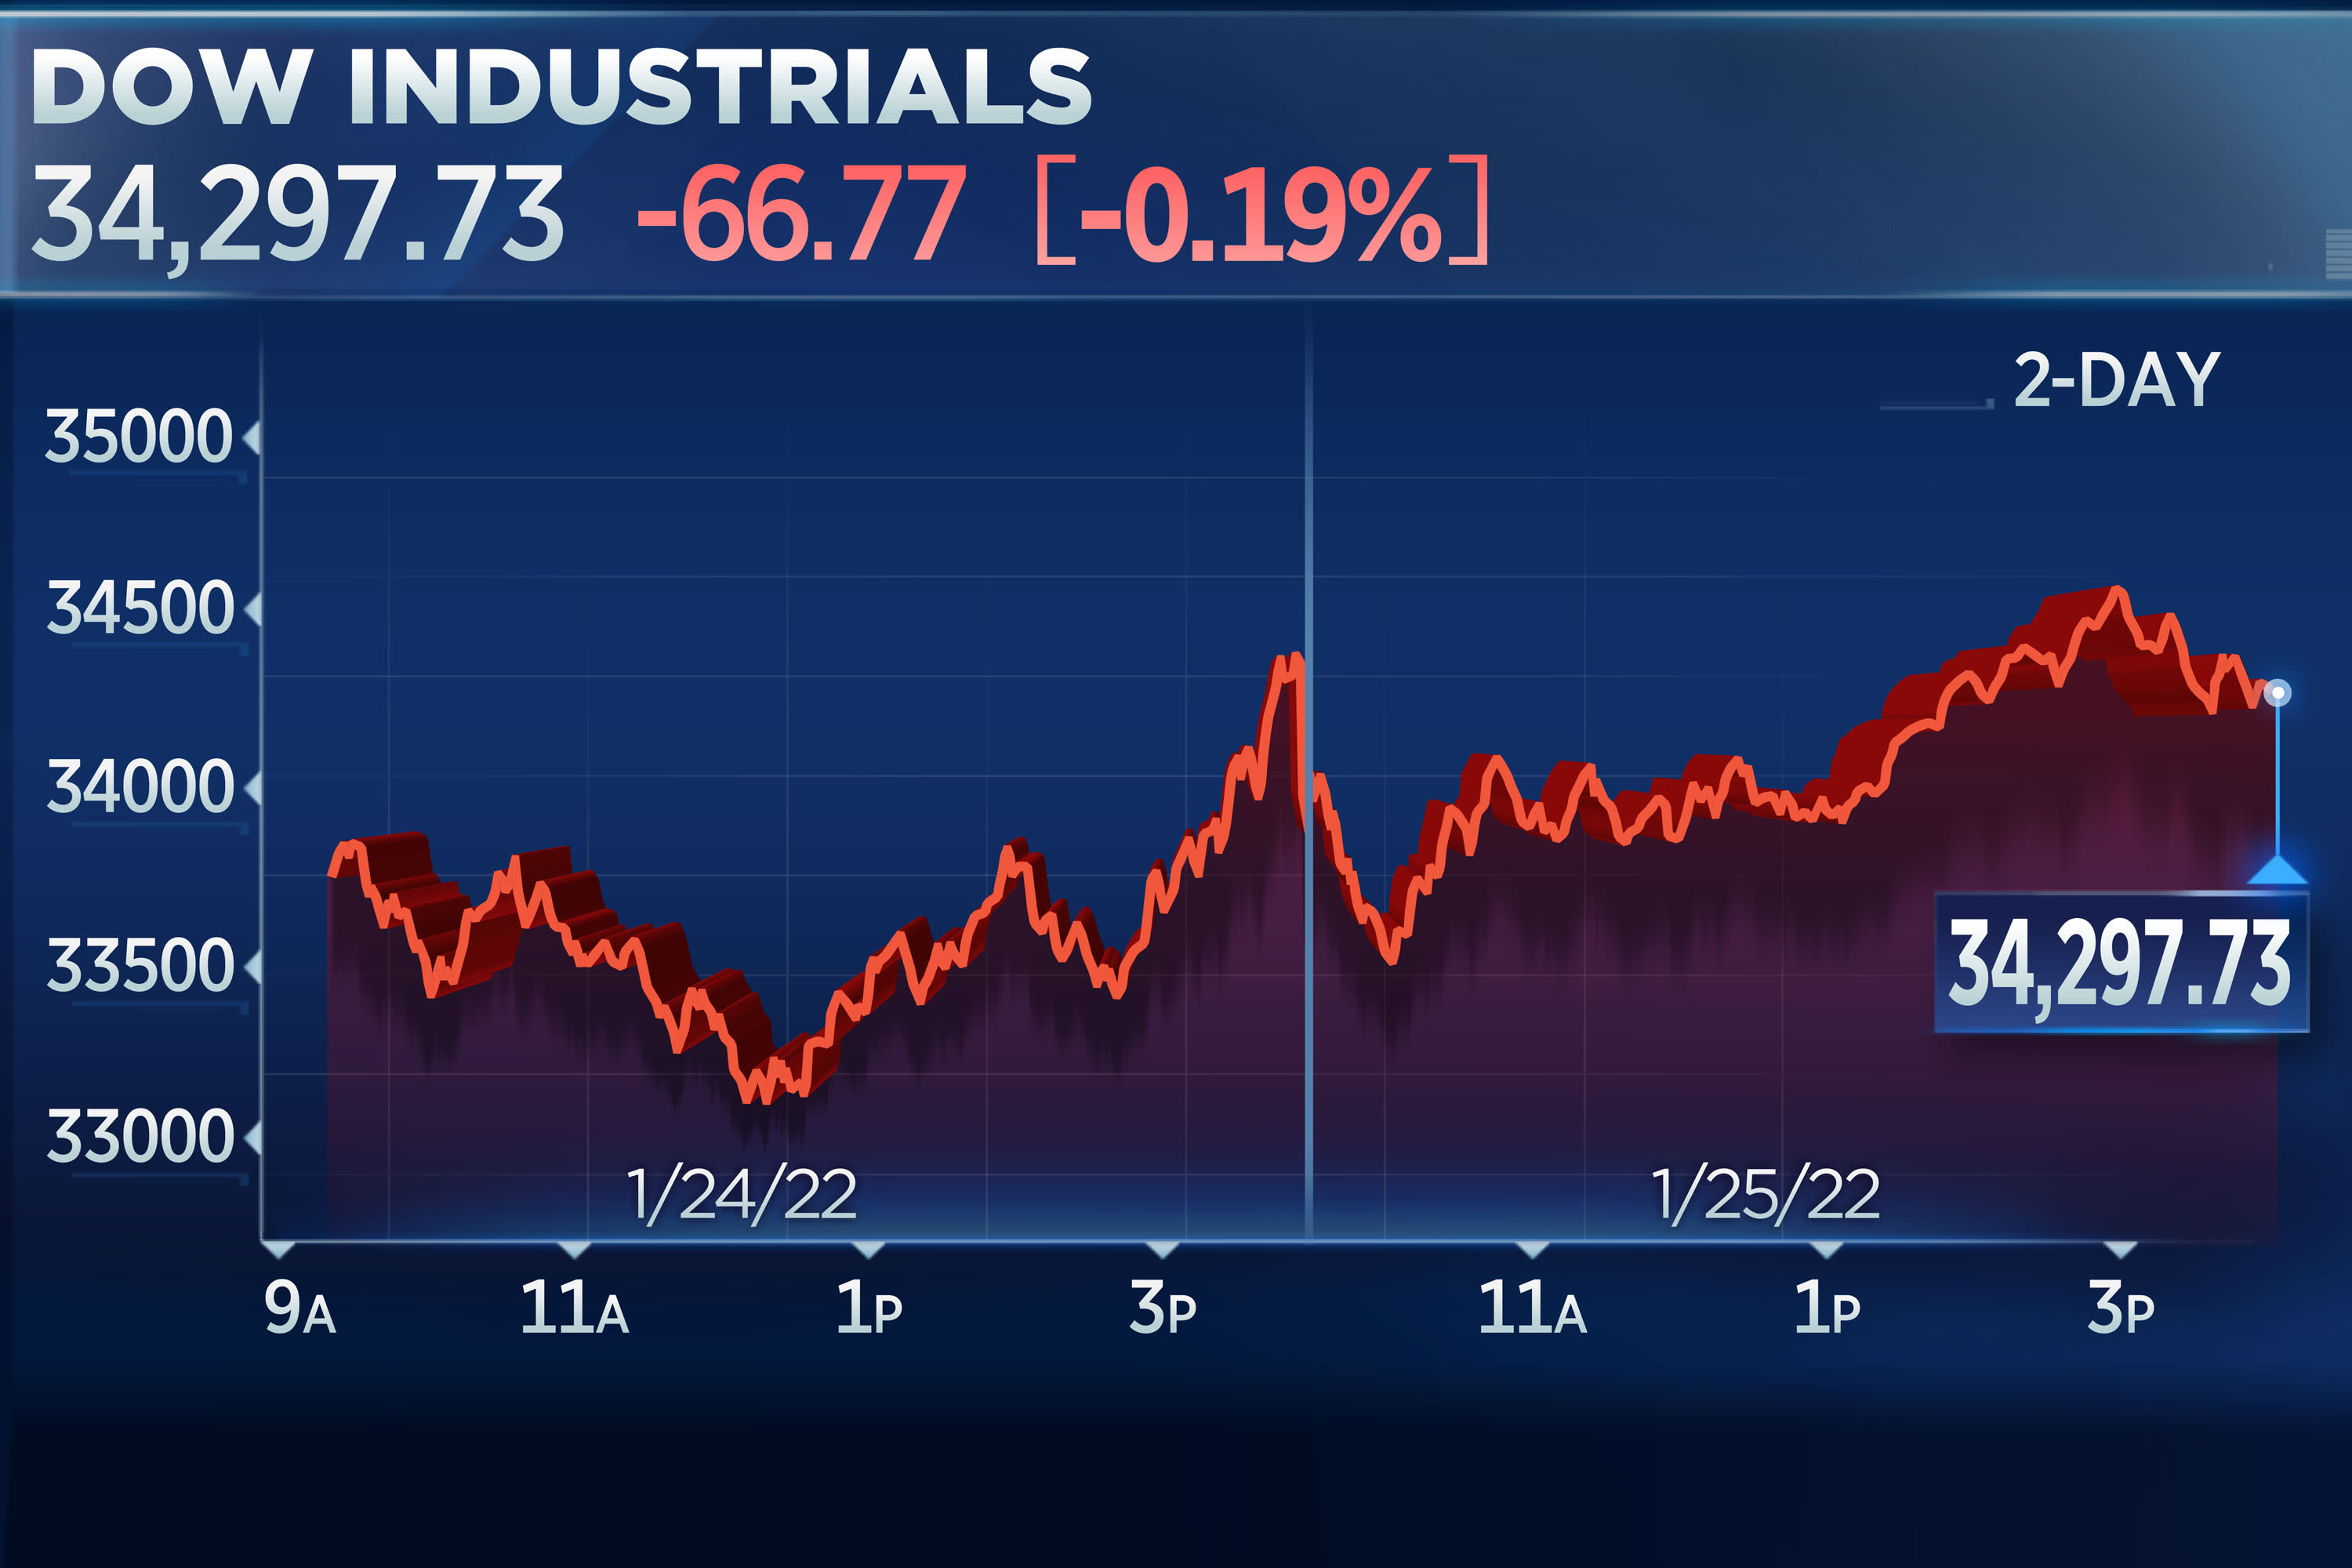 Dow falls more than 300 points, Nasdaq sheds 2.6% as January wild trading continues